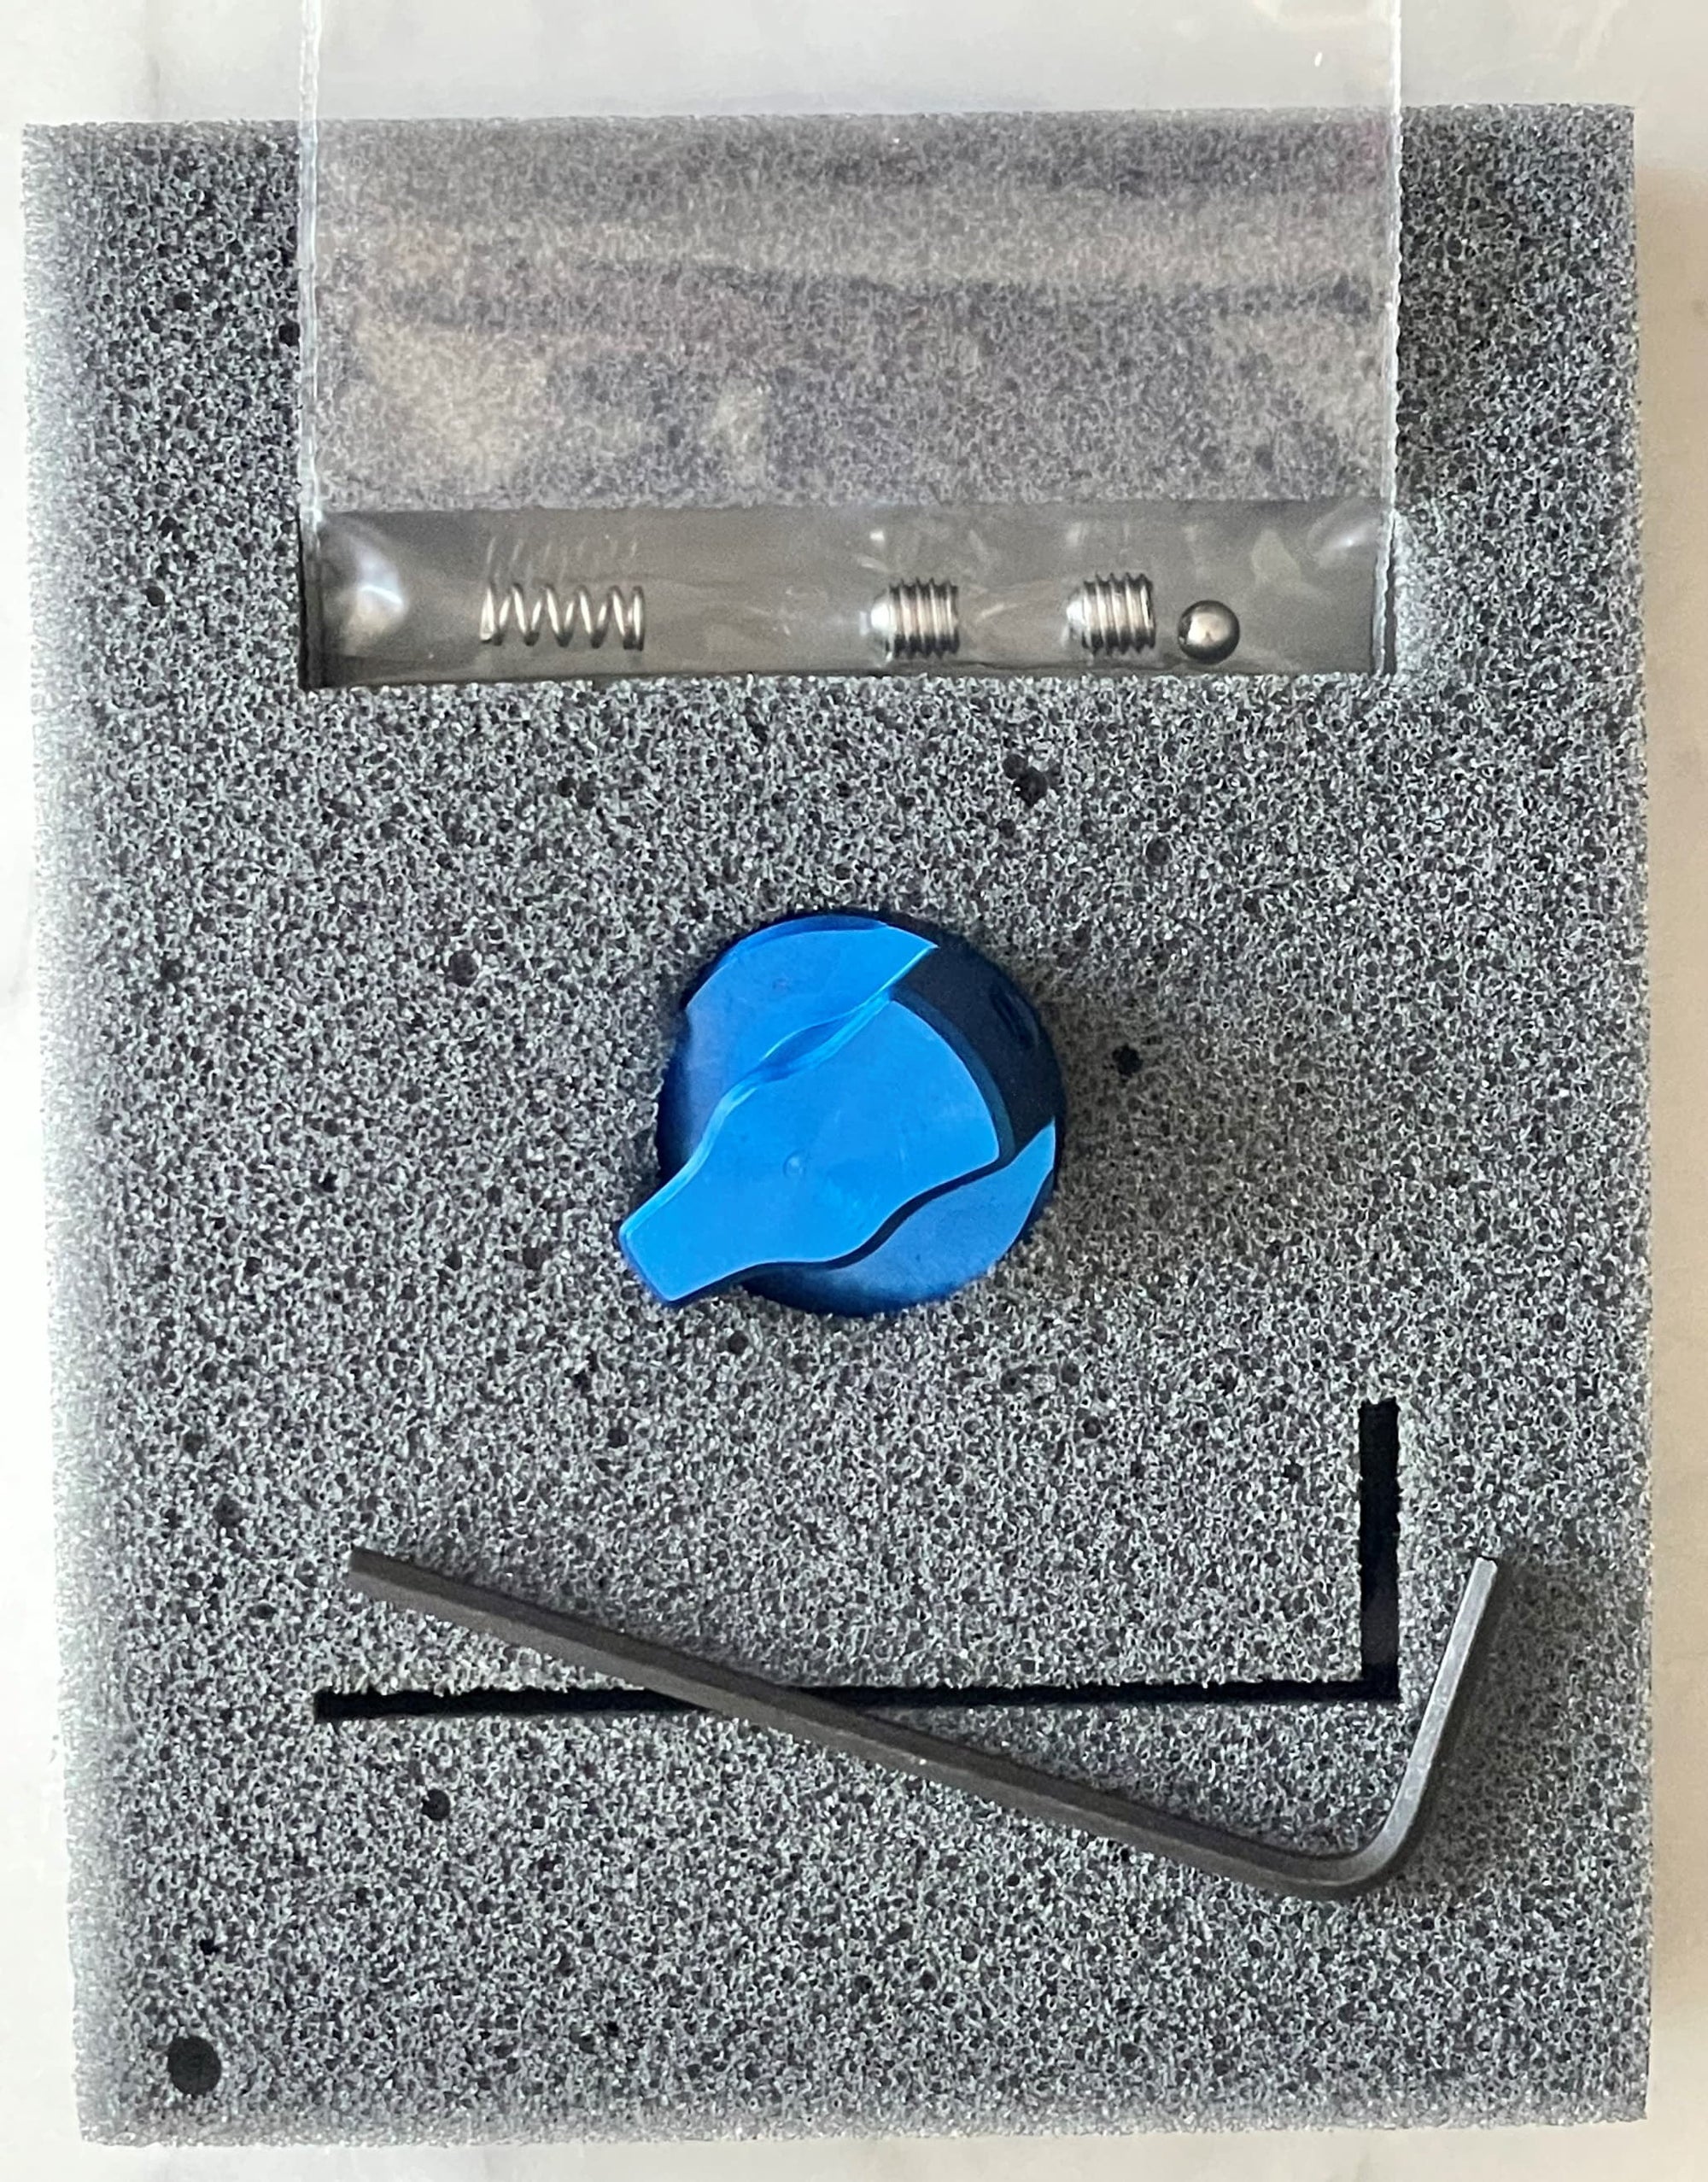 mscmotousa, Blue Adjuster Knob for RM3, Axis, and VectorMX Steering Dampers, MK0001, axis, rm3, vectormx, , Imported and distributed in North & South America by Lindeco Genuine Powersports.